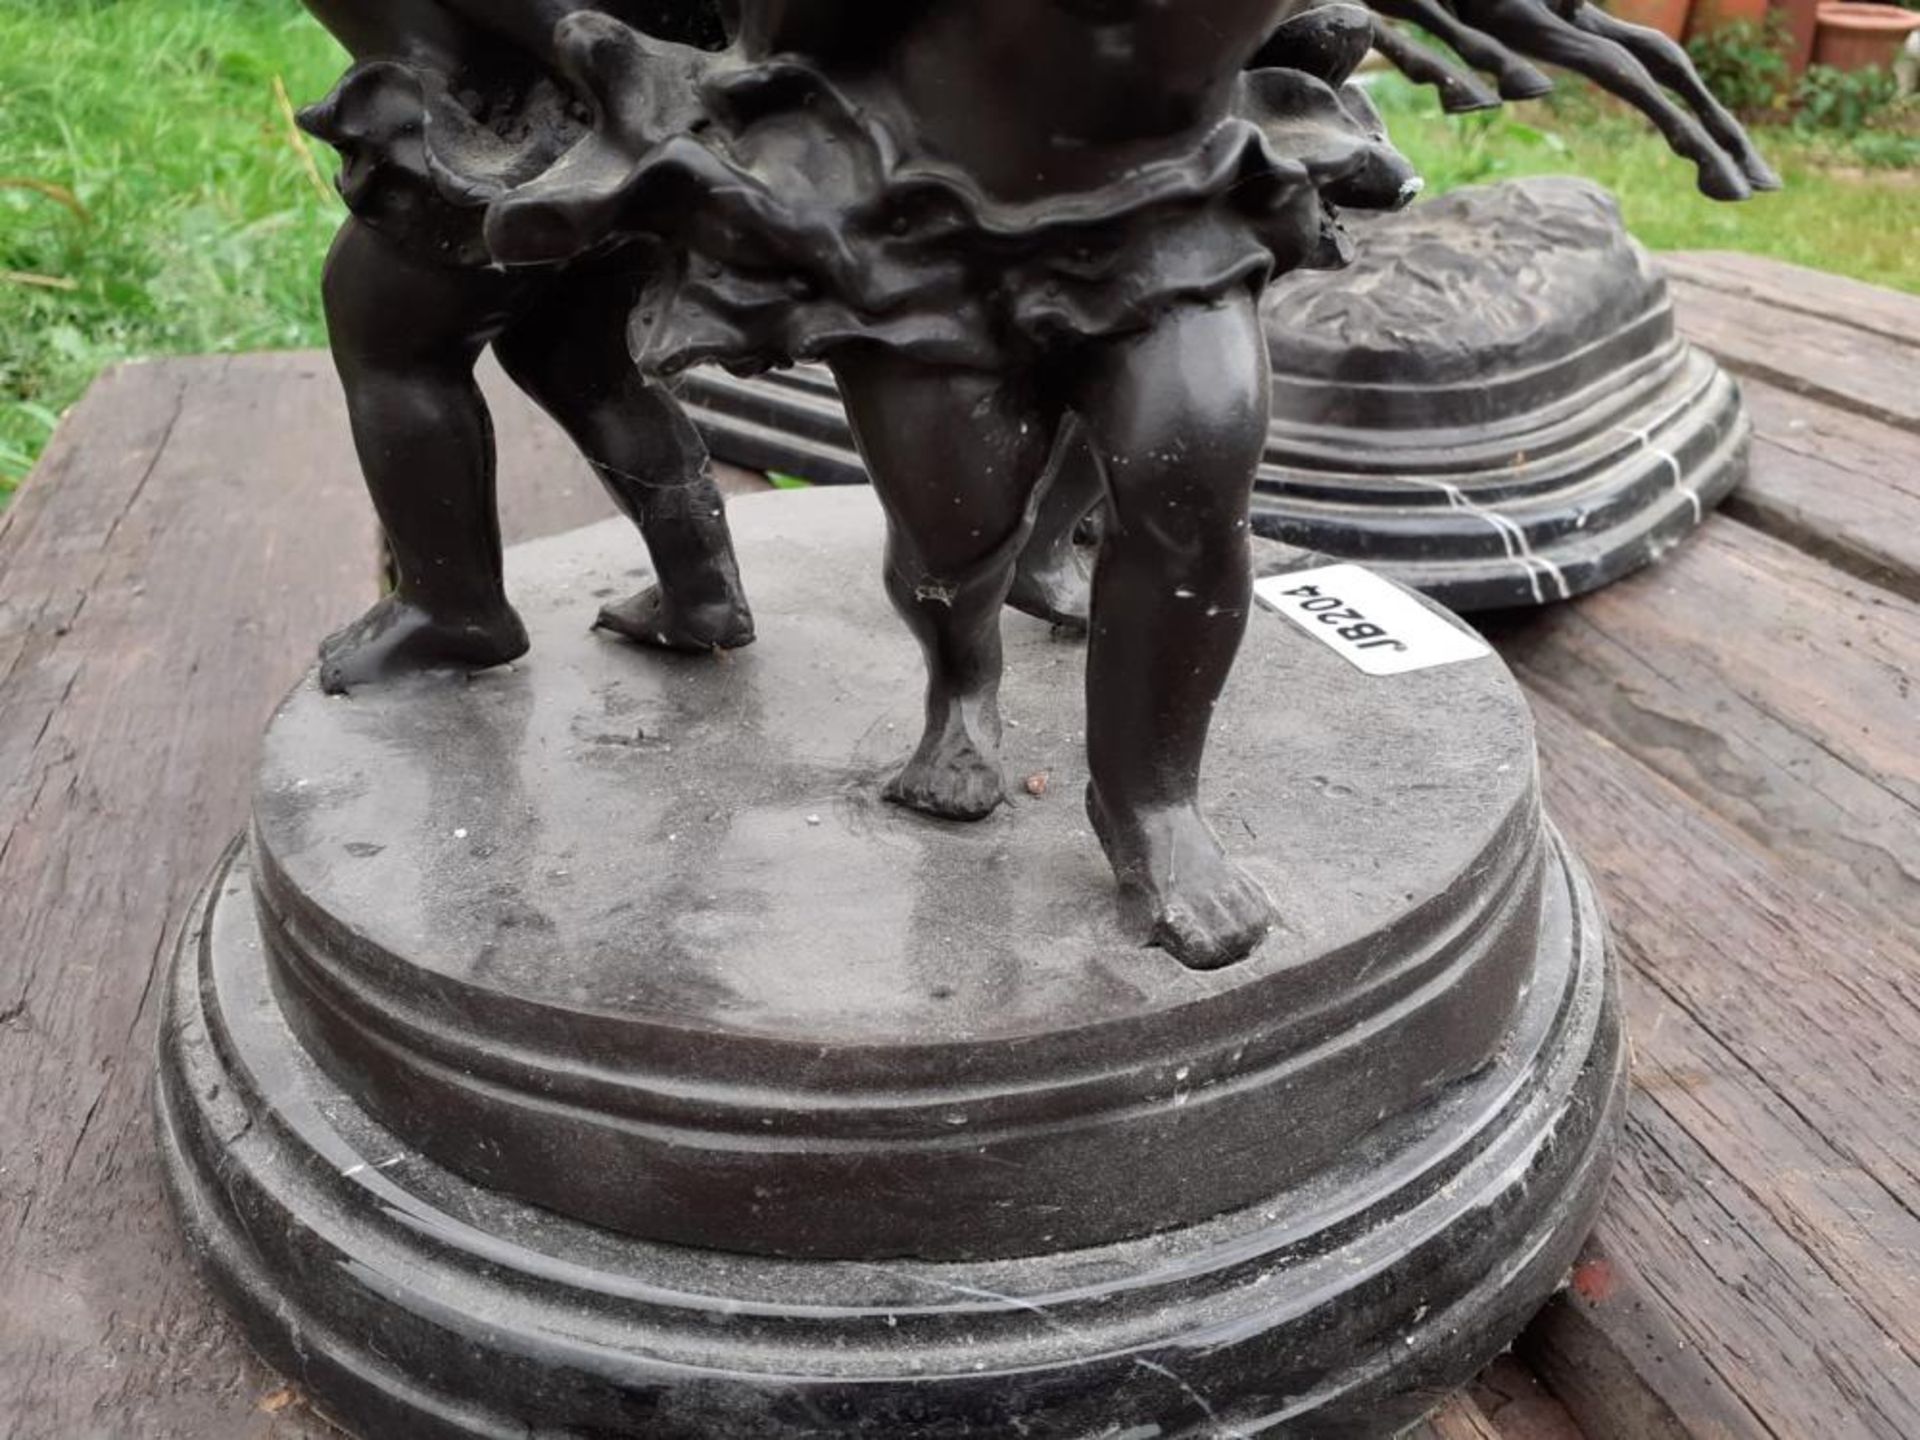 1 x Large Table Statue / Sculpture Of 3 Cherubs Carrying A Planter In Black Metal With Marble / Gran - Image 6 of 10